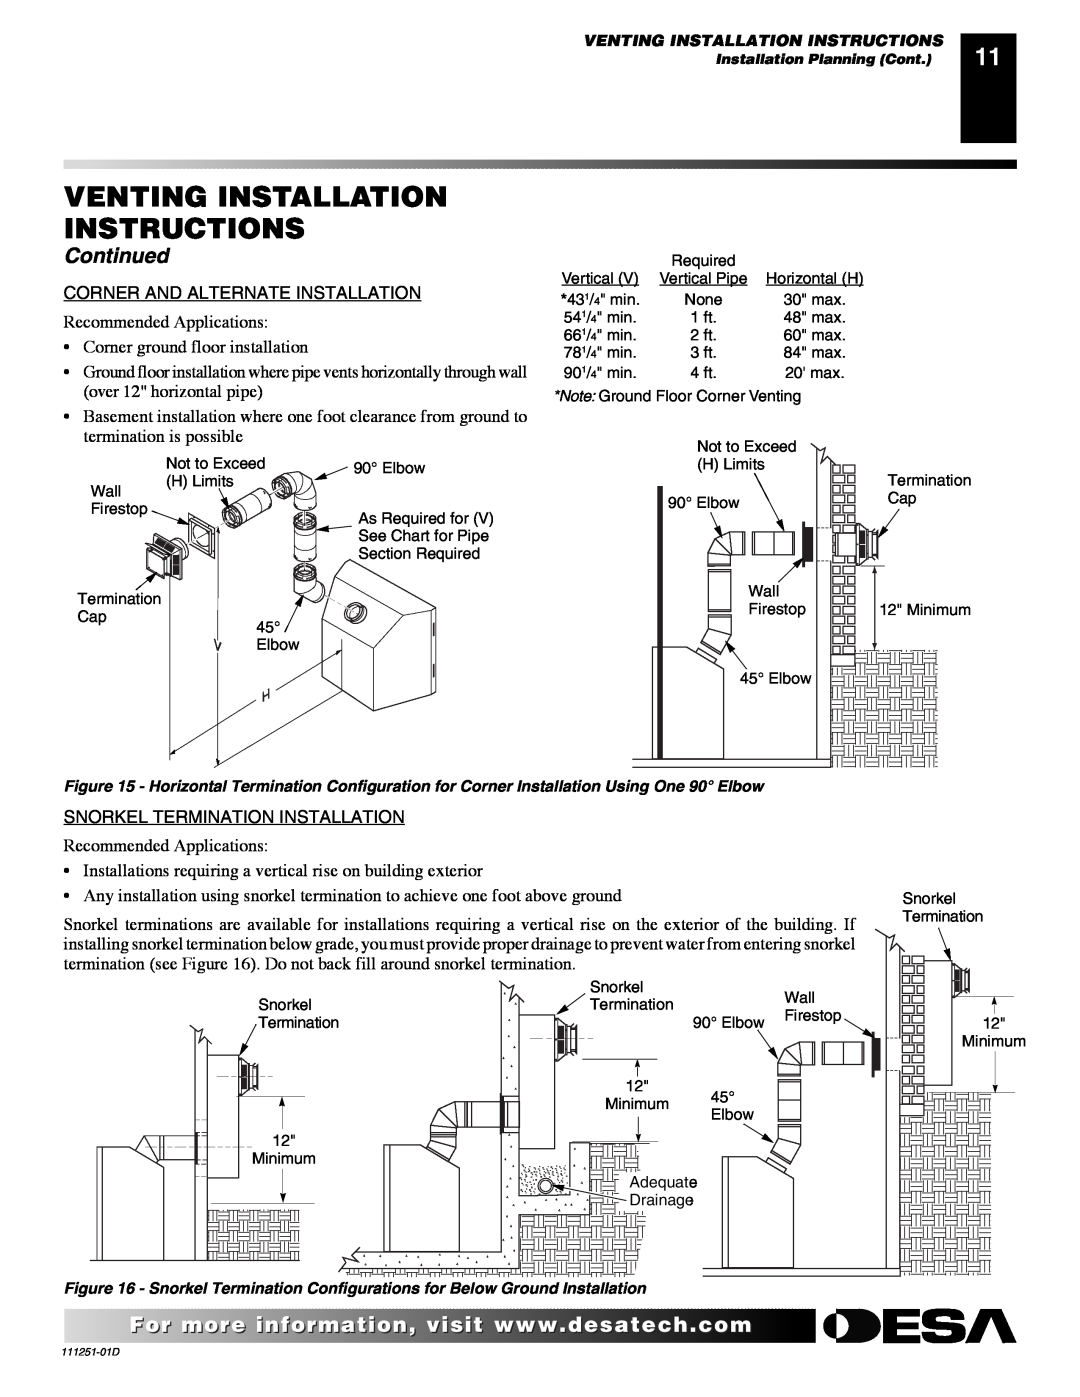 Desa (V)T36ENA SERIES, (V)T36EPA SERIES Venting Installation Instructions, Continued, Recommended Applications 